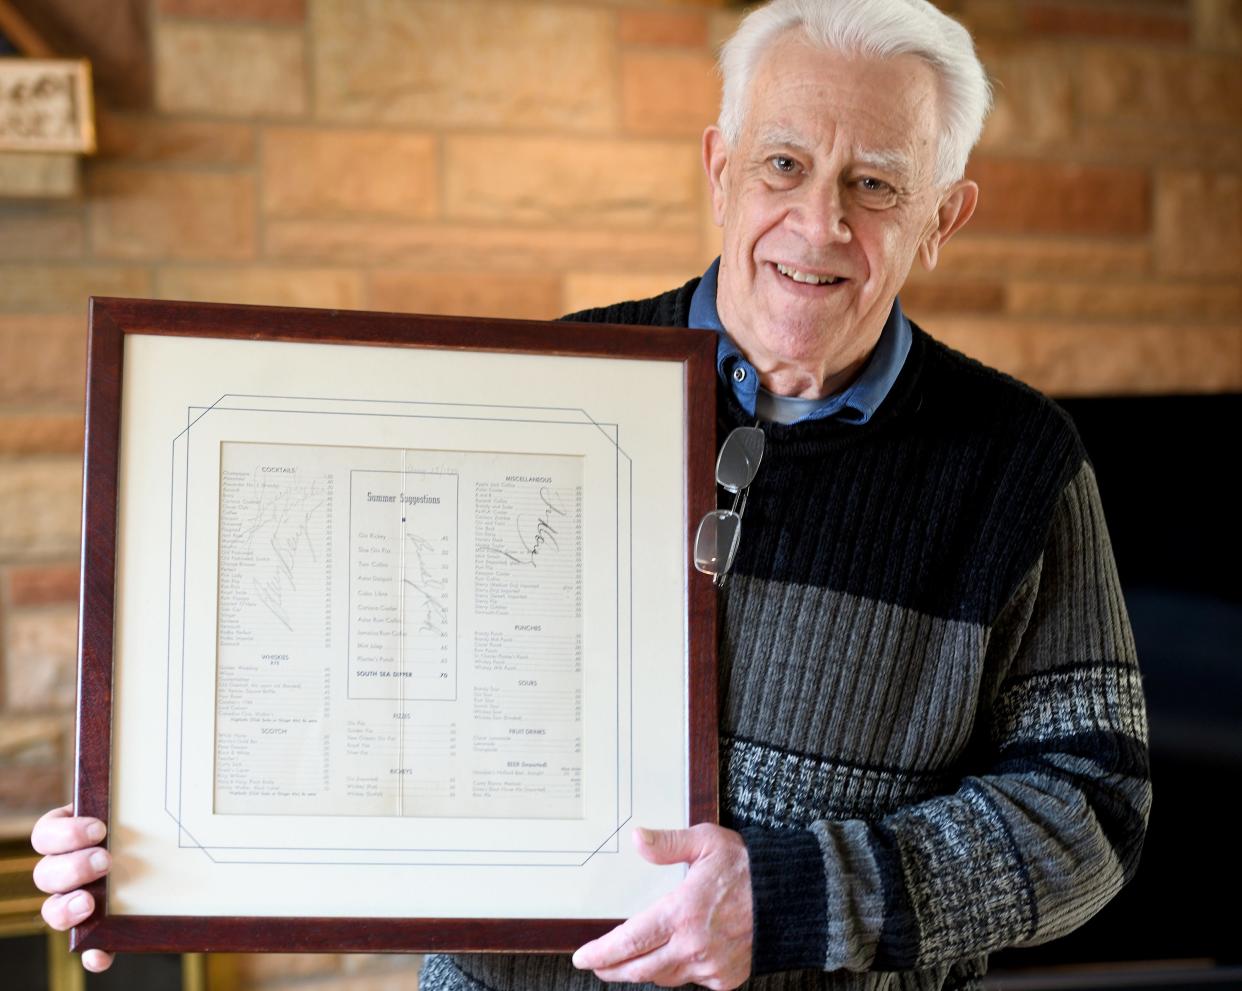 North Canton resident Joe Fraley holds the old Hotel Astor cocktail menu his father almost threw away. It has autographs of the band playing that night in 1940, including Tommy Dorsey, Buddy Rich and guest singer Frank Sinatra.